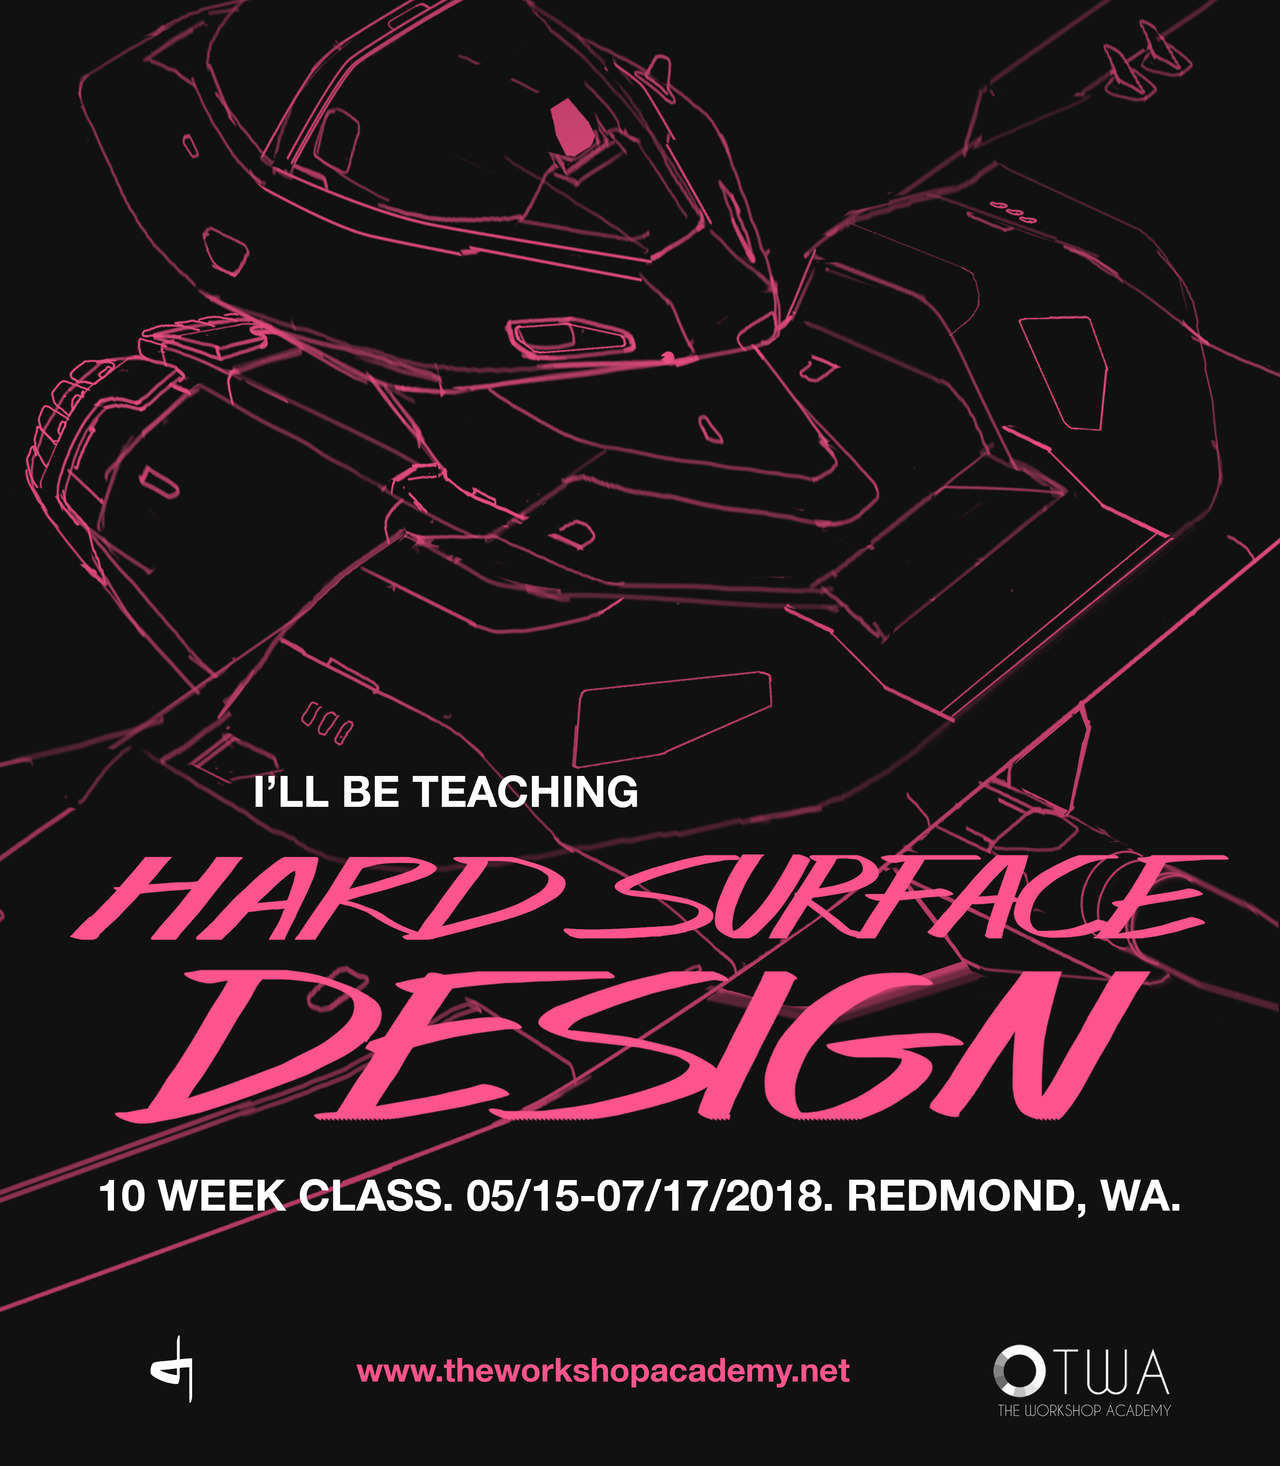 ishouldsketchmore: I’ll be teaching a class at the Workshop Academy in the Seattle